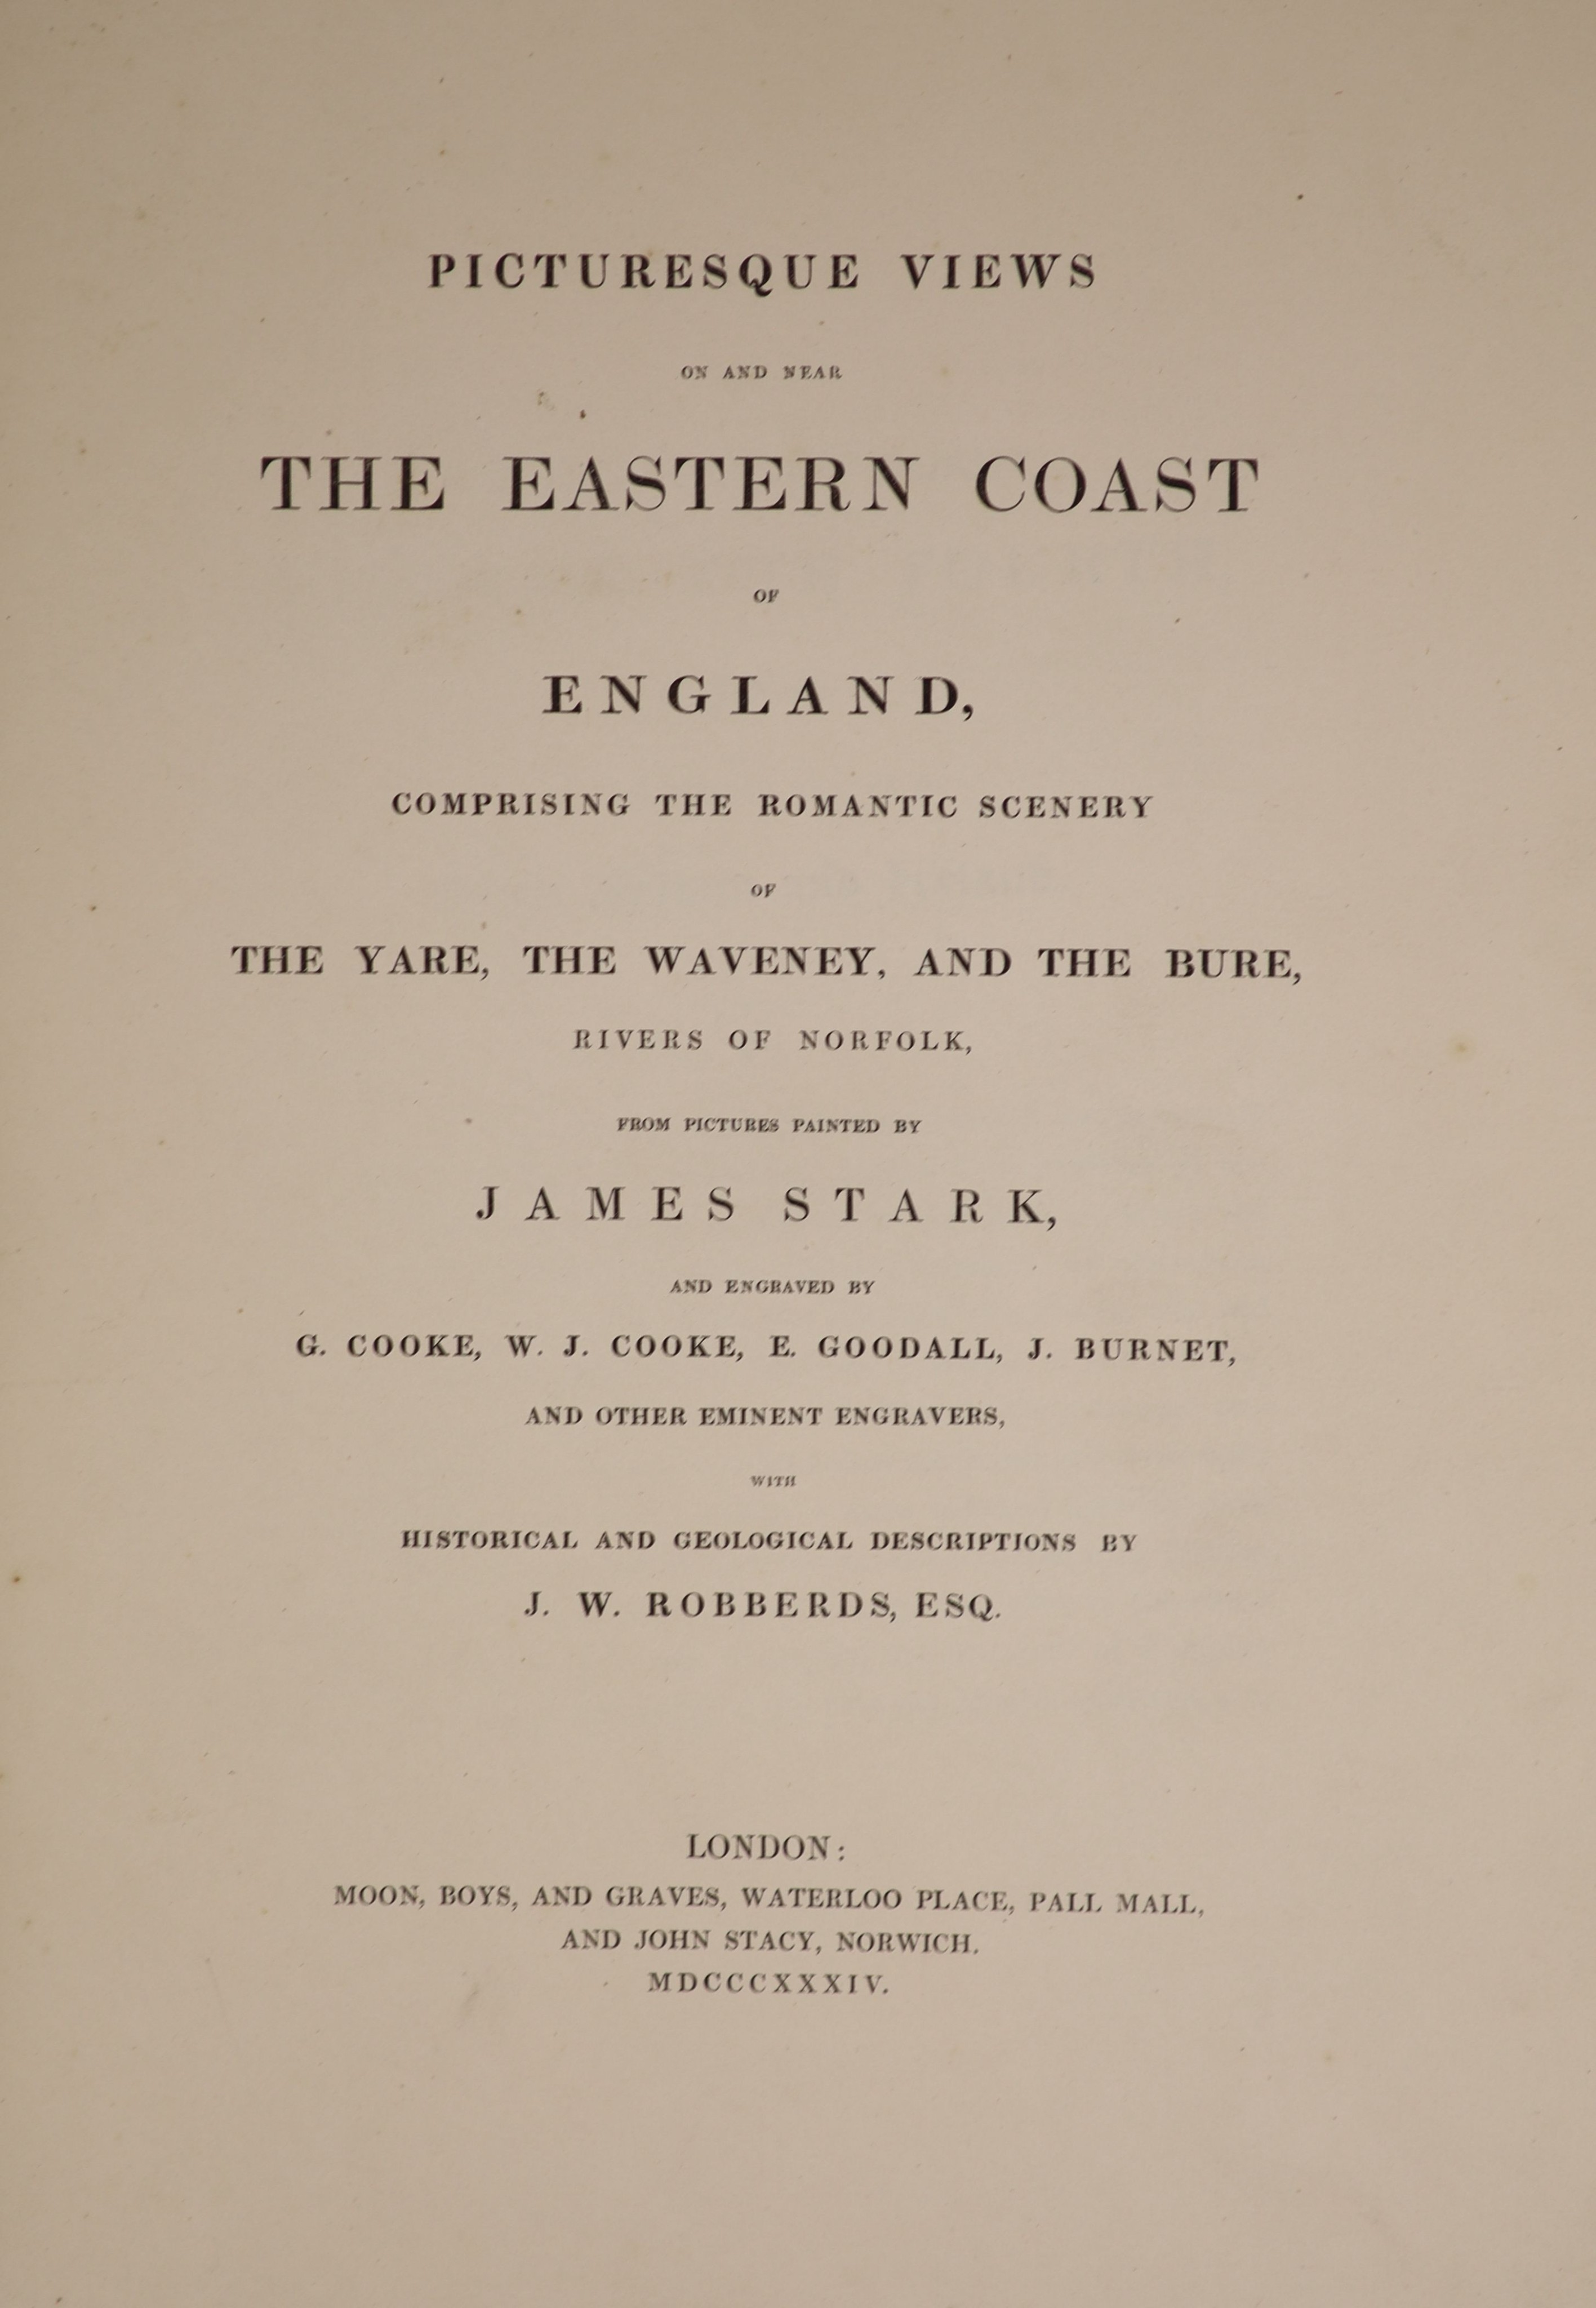 Stark, James - Picturesque Views on and Near the Eastern Coast of England, 1st edition, folio, cloth, with engraved title and 24 plates on India, Moon, Boys, and Graves, London, 1834